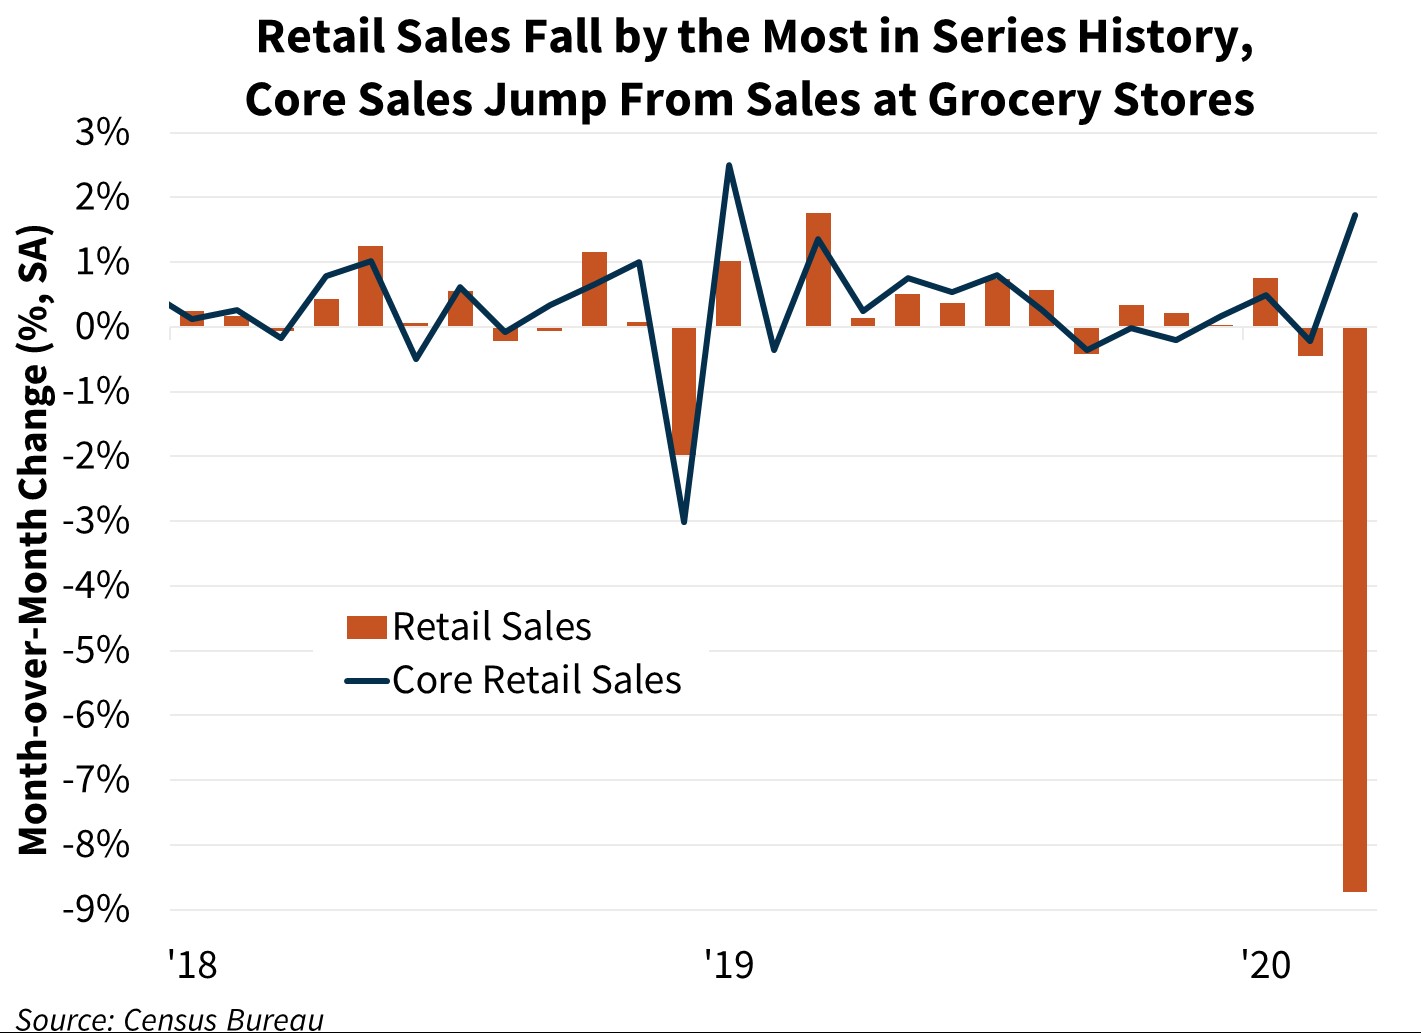  Retail Sales Fall by the Most in Series History, Core Sales Jump From Sales at Grocery Stores 